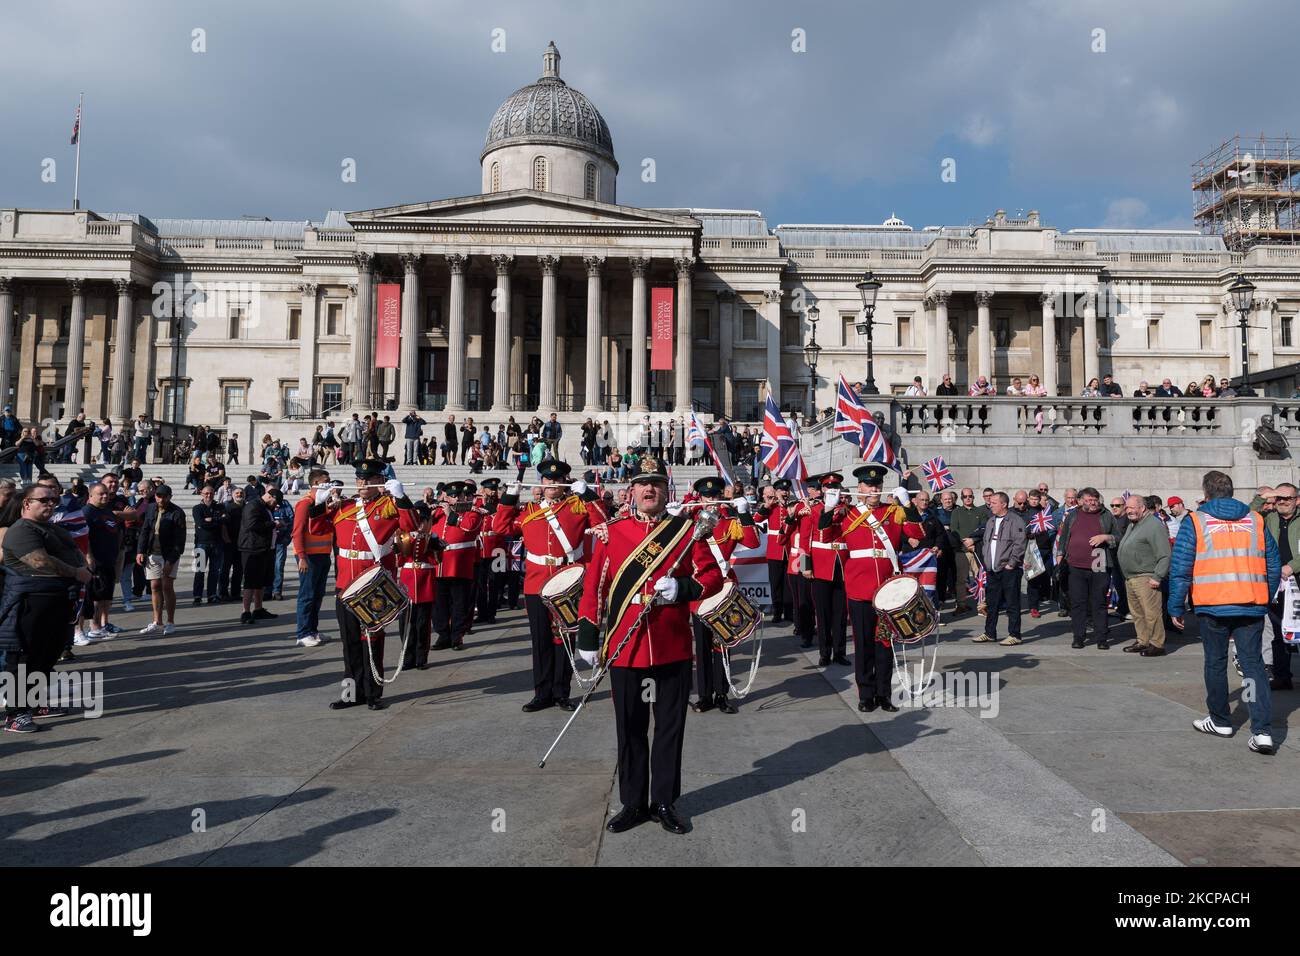 LONDON, UNITED KINGDOM - OCTOBER 09, 2021: Marching band plays as Northern Ireland unionists and loyalists gather in Trafalgar Square before marching to Downing Street in a protest against the Northern Ireland Protocol, which they argue undermines Northern Ireland's position as part of the United Kingdom by creating a trade border on the Irish Sea on October 09, 2021 in London, England. Next week, the EU is set to bring forward new proposals for the Northern Ireland Protocol, which was implemented after Brexit to protect the Good Friday agreement by keeping Northern Ireland aligned with the EU Stock Photo